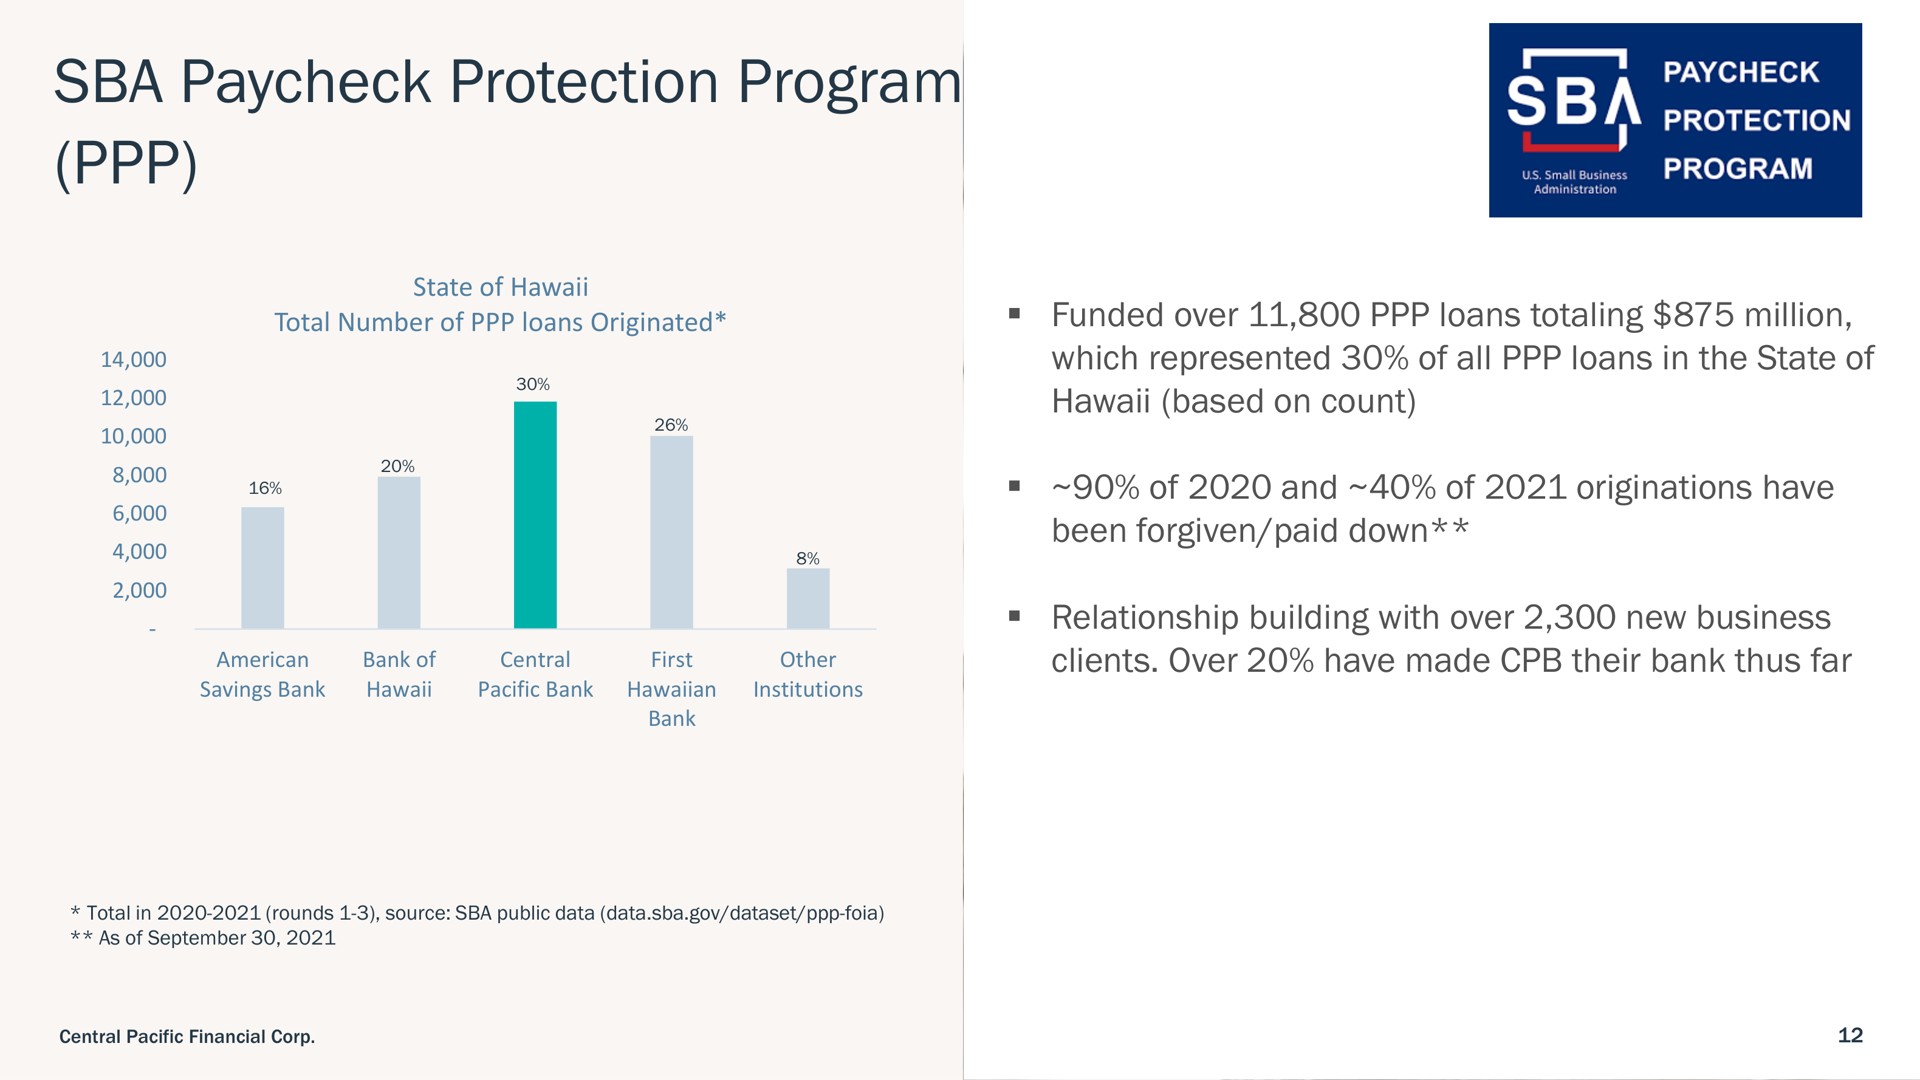 protection program | Central Pacific Financial